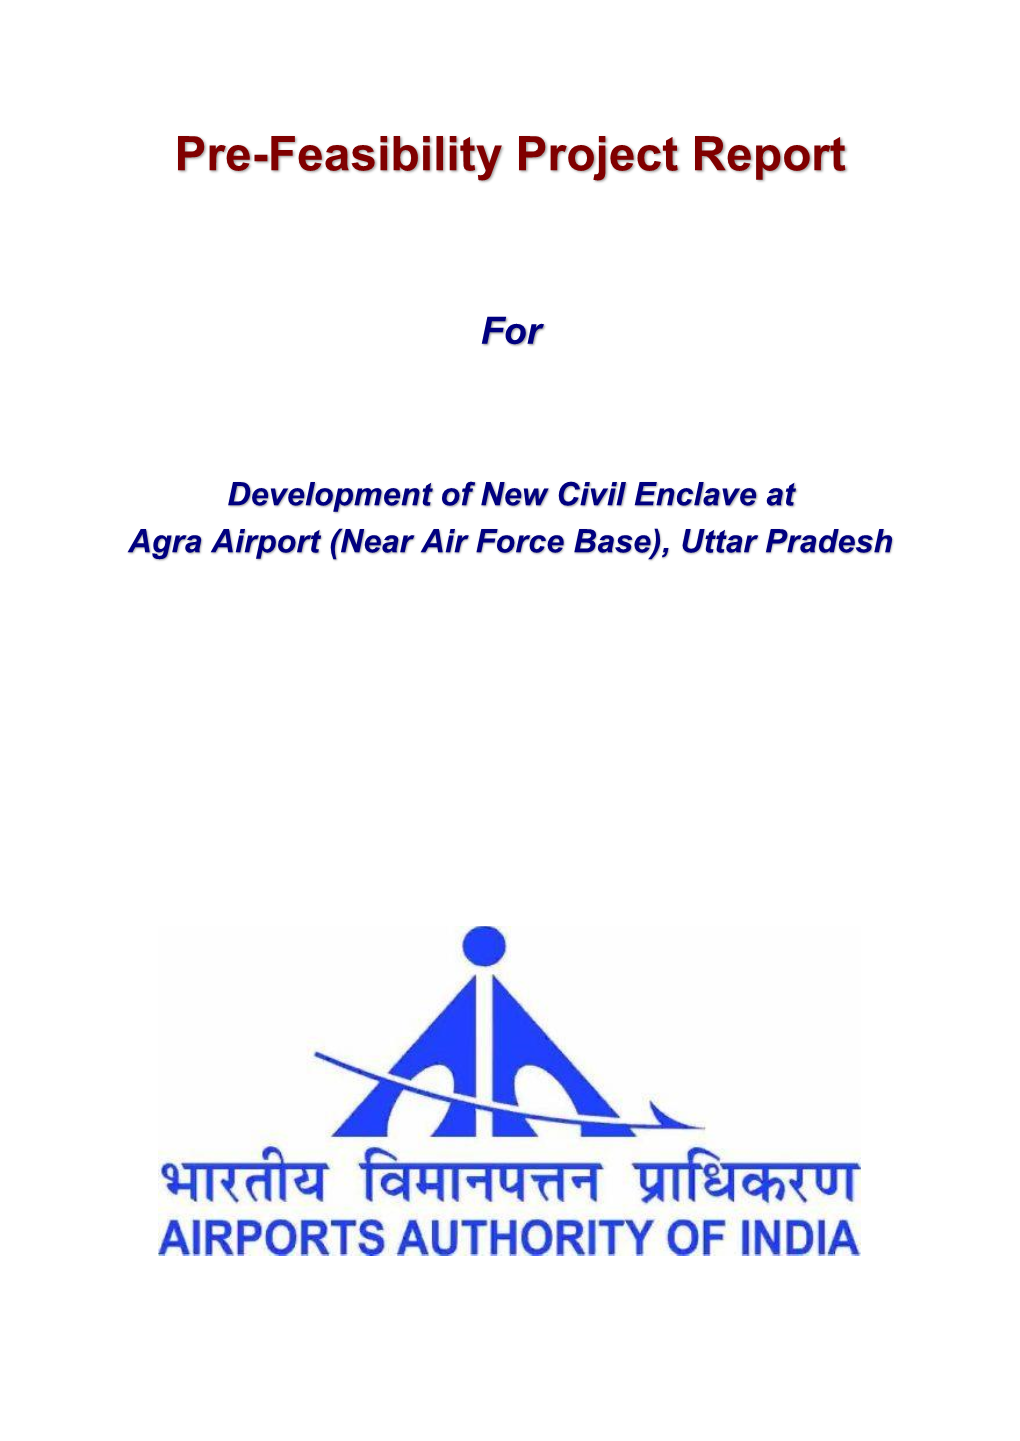 1 New Civil Enclave at Agra Airport (Near Air Force Base)